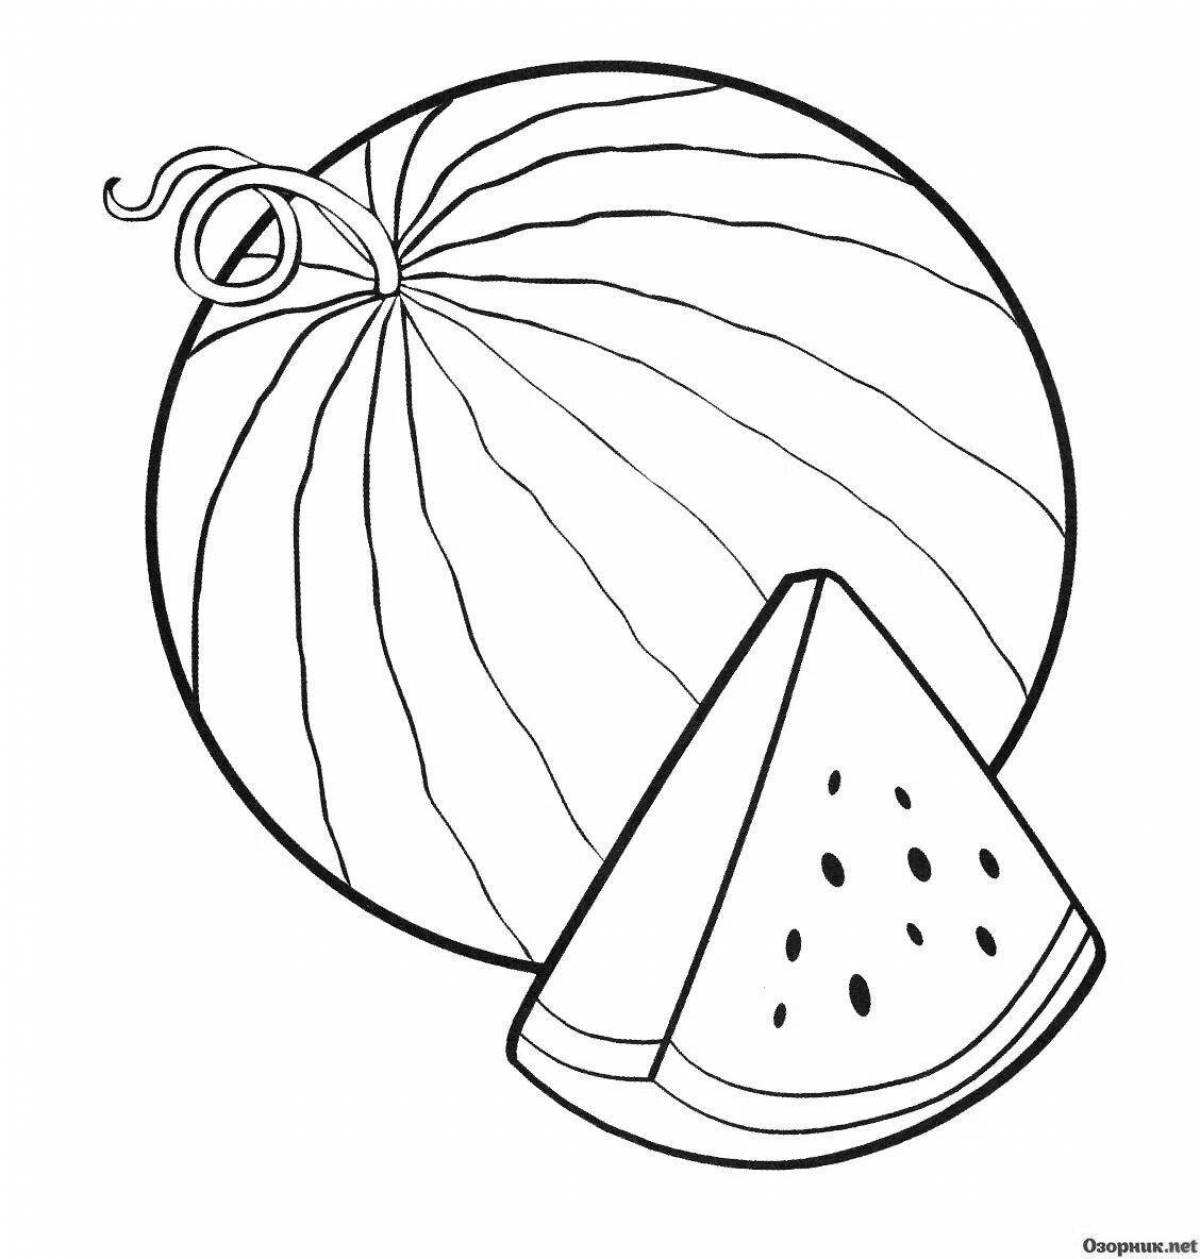 Glorious watermelon coloring book